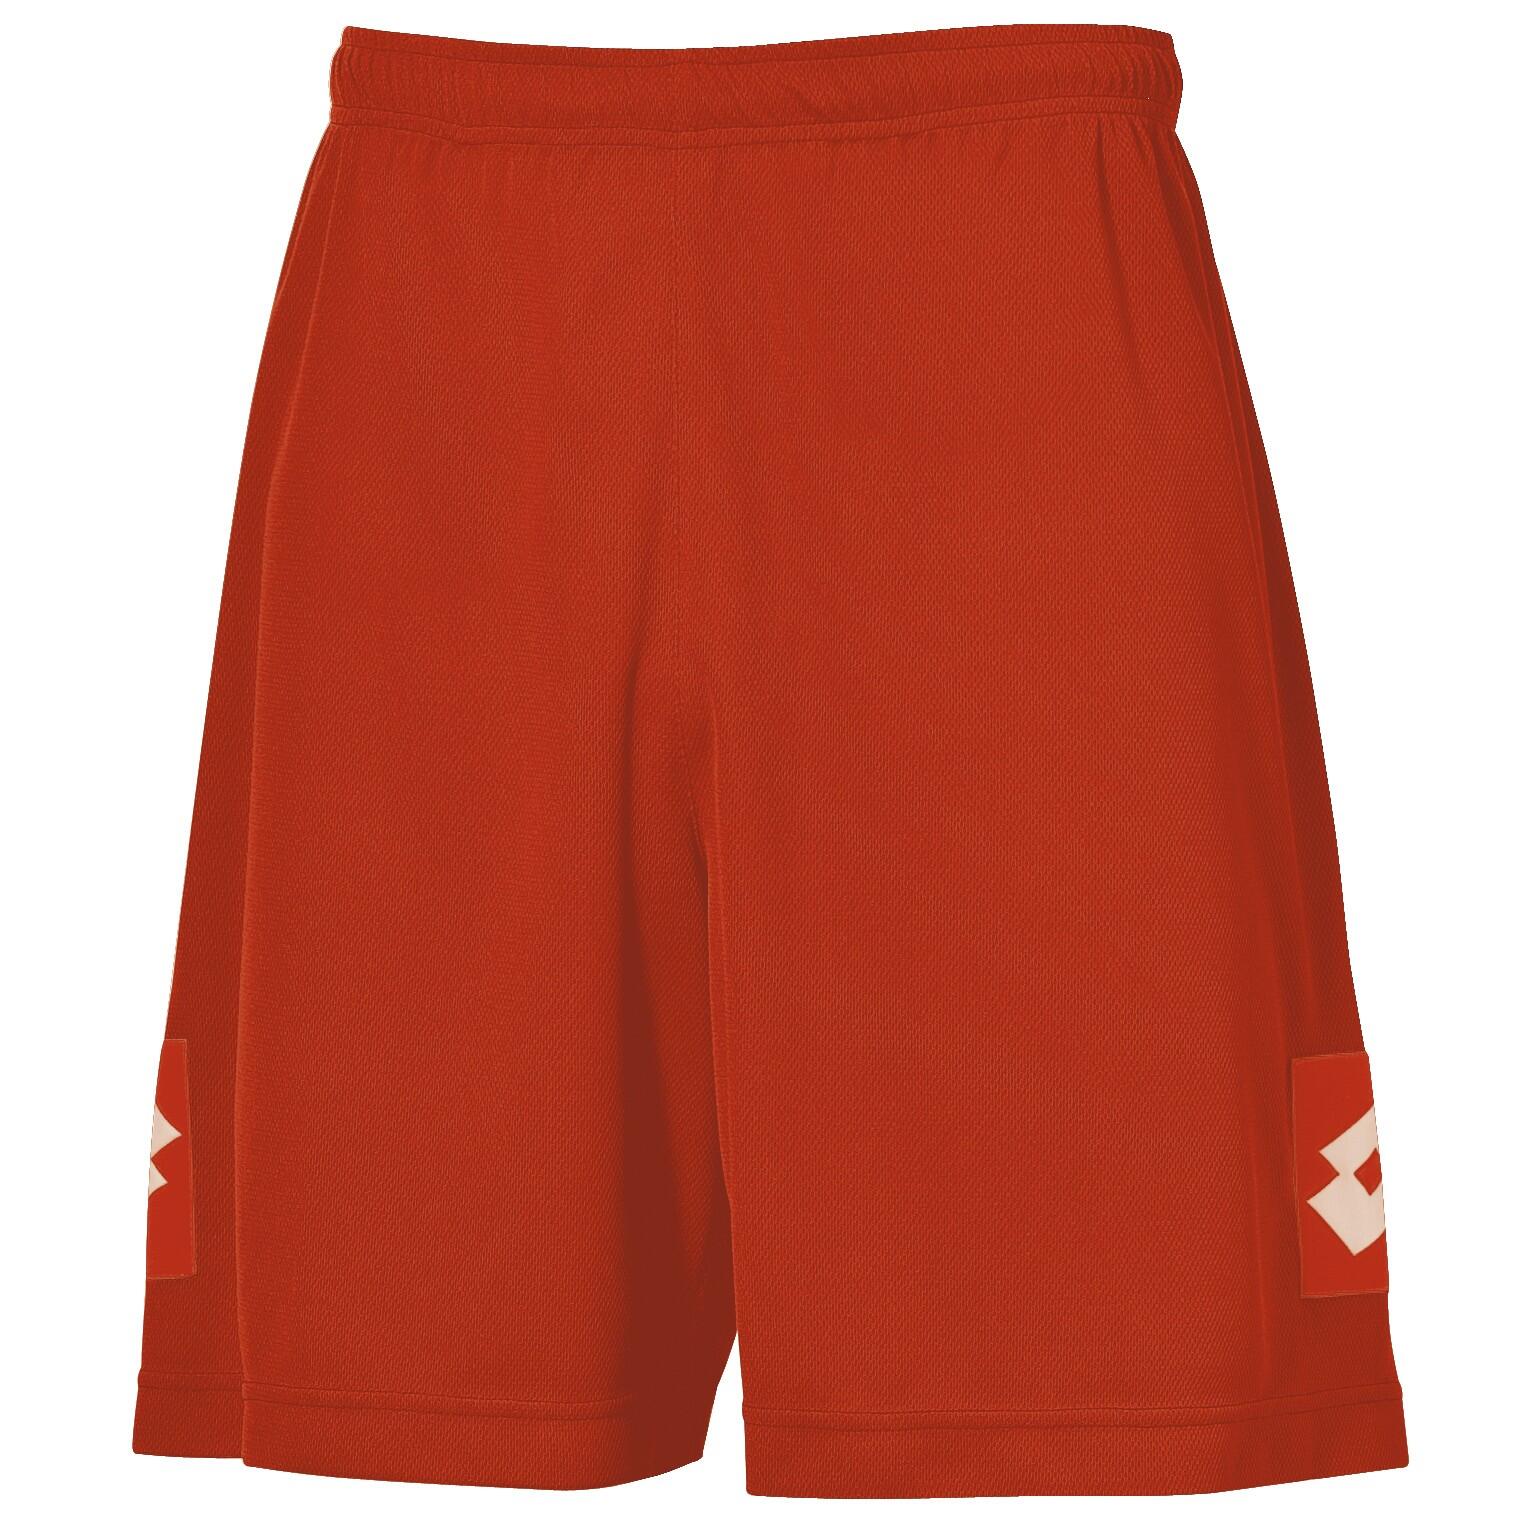 LOTTO Mens Football Sports Speed Shorts (Flame Red)